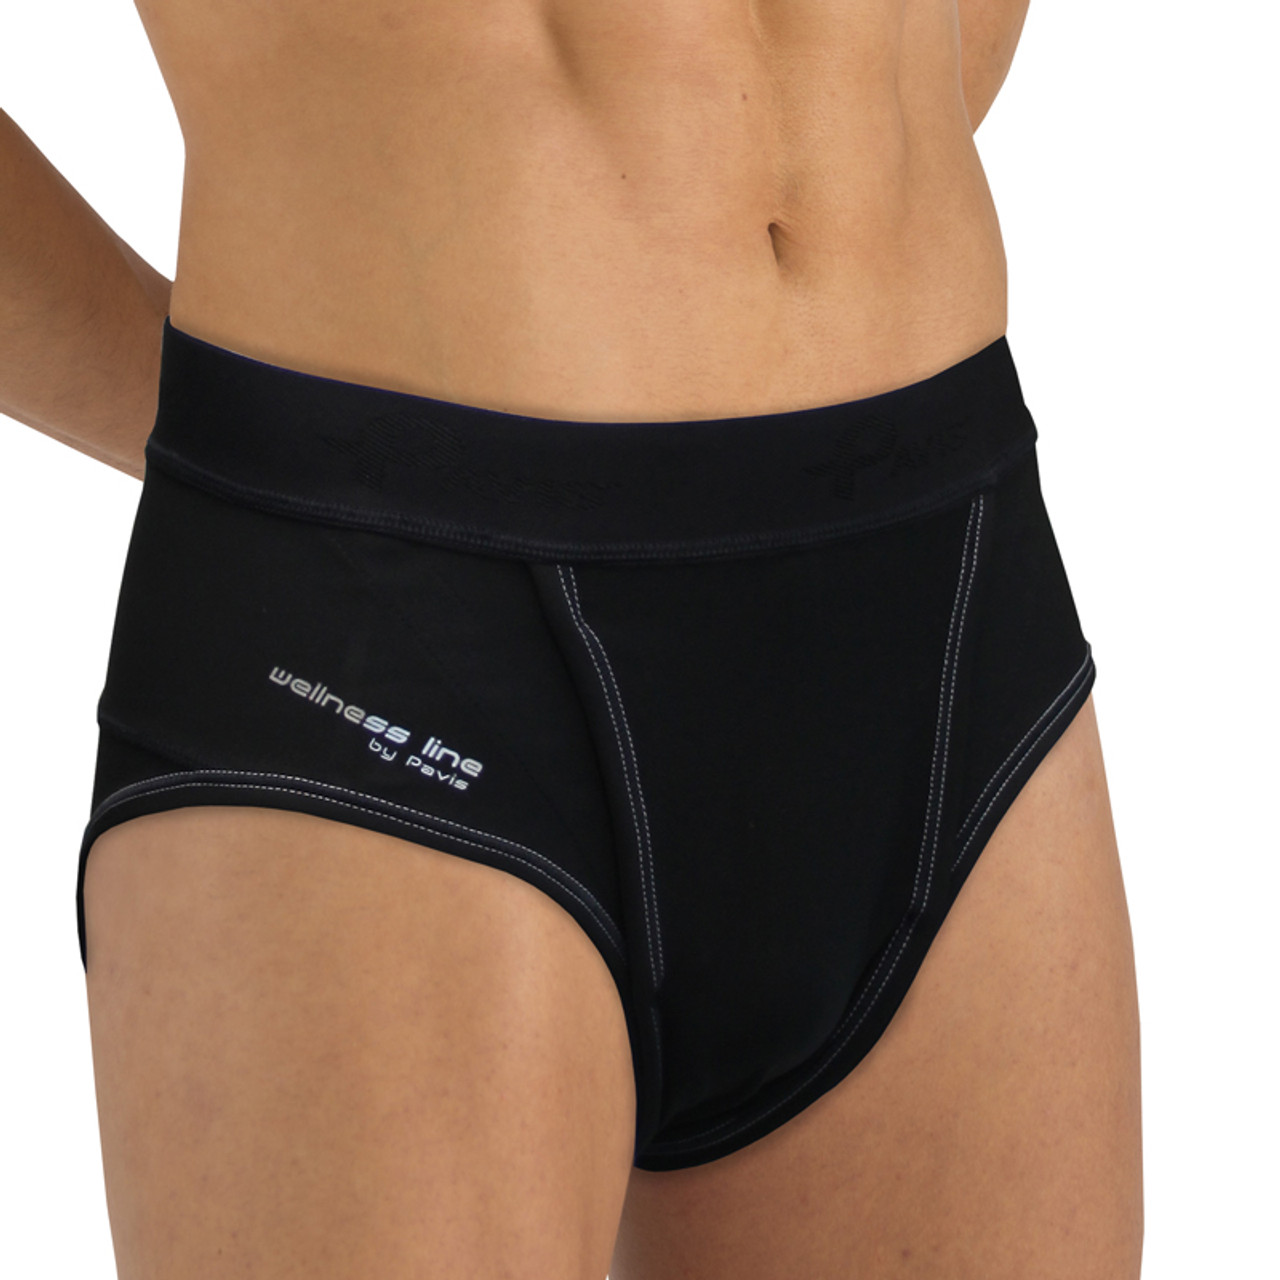 HPH Men's Hernia Bathing Suit – HPH Hernia Support Products